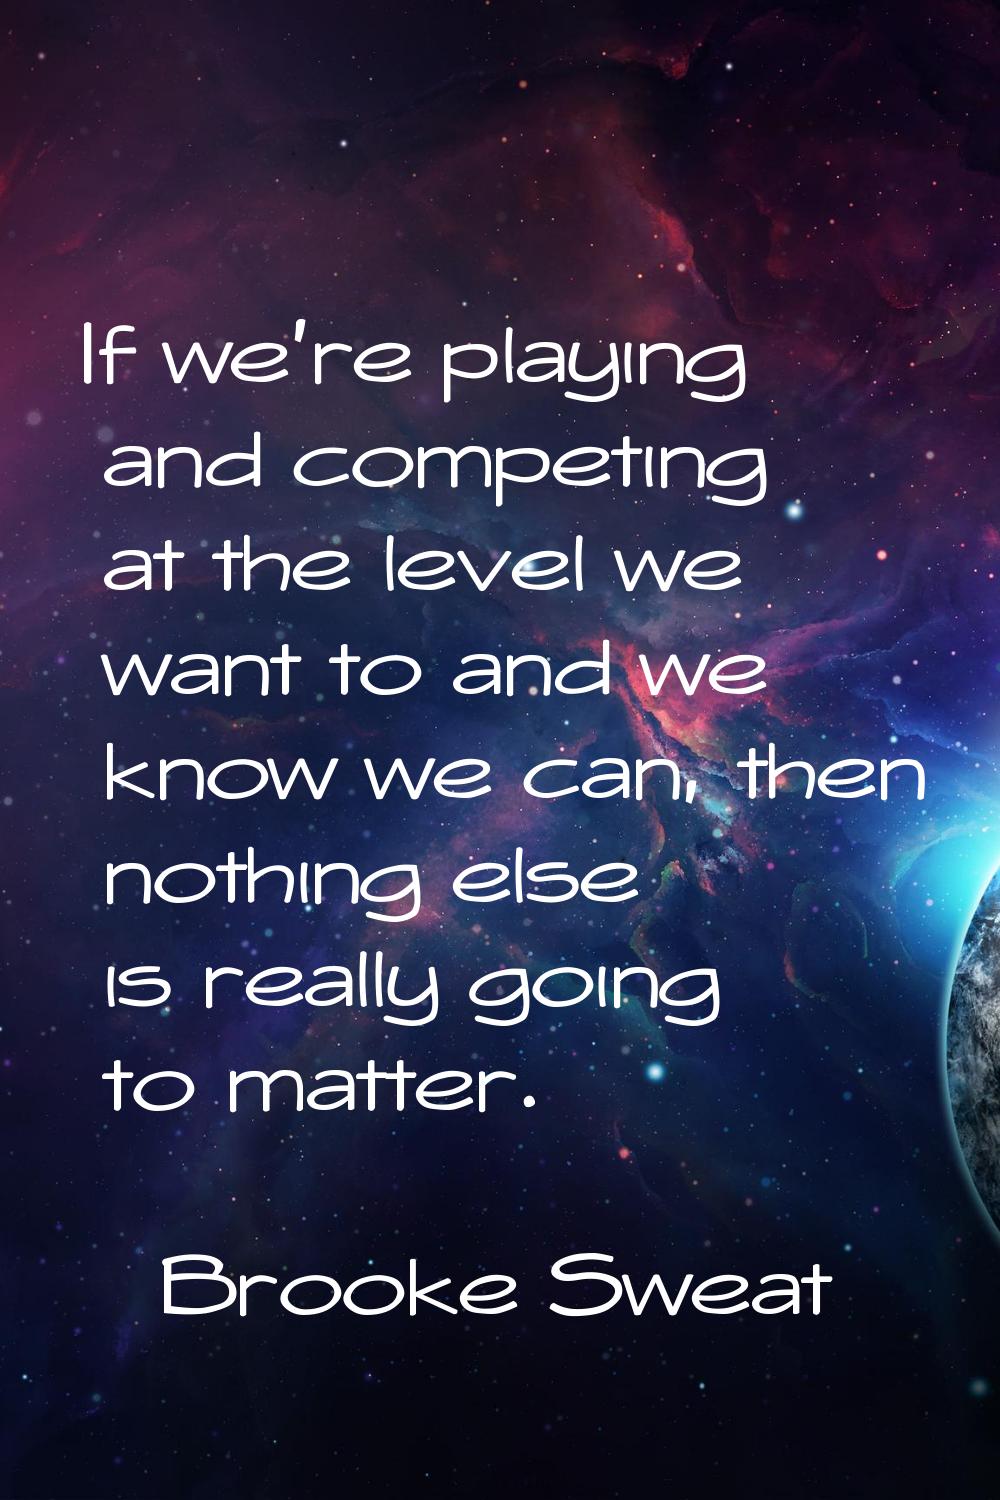 If we're playing and competing at the level we want to and we know we can, then nothing else is rea